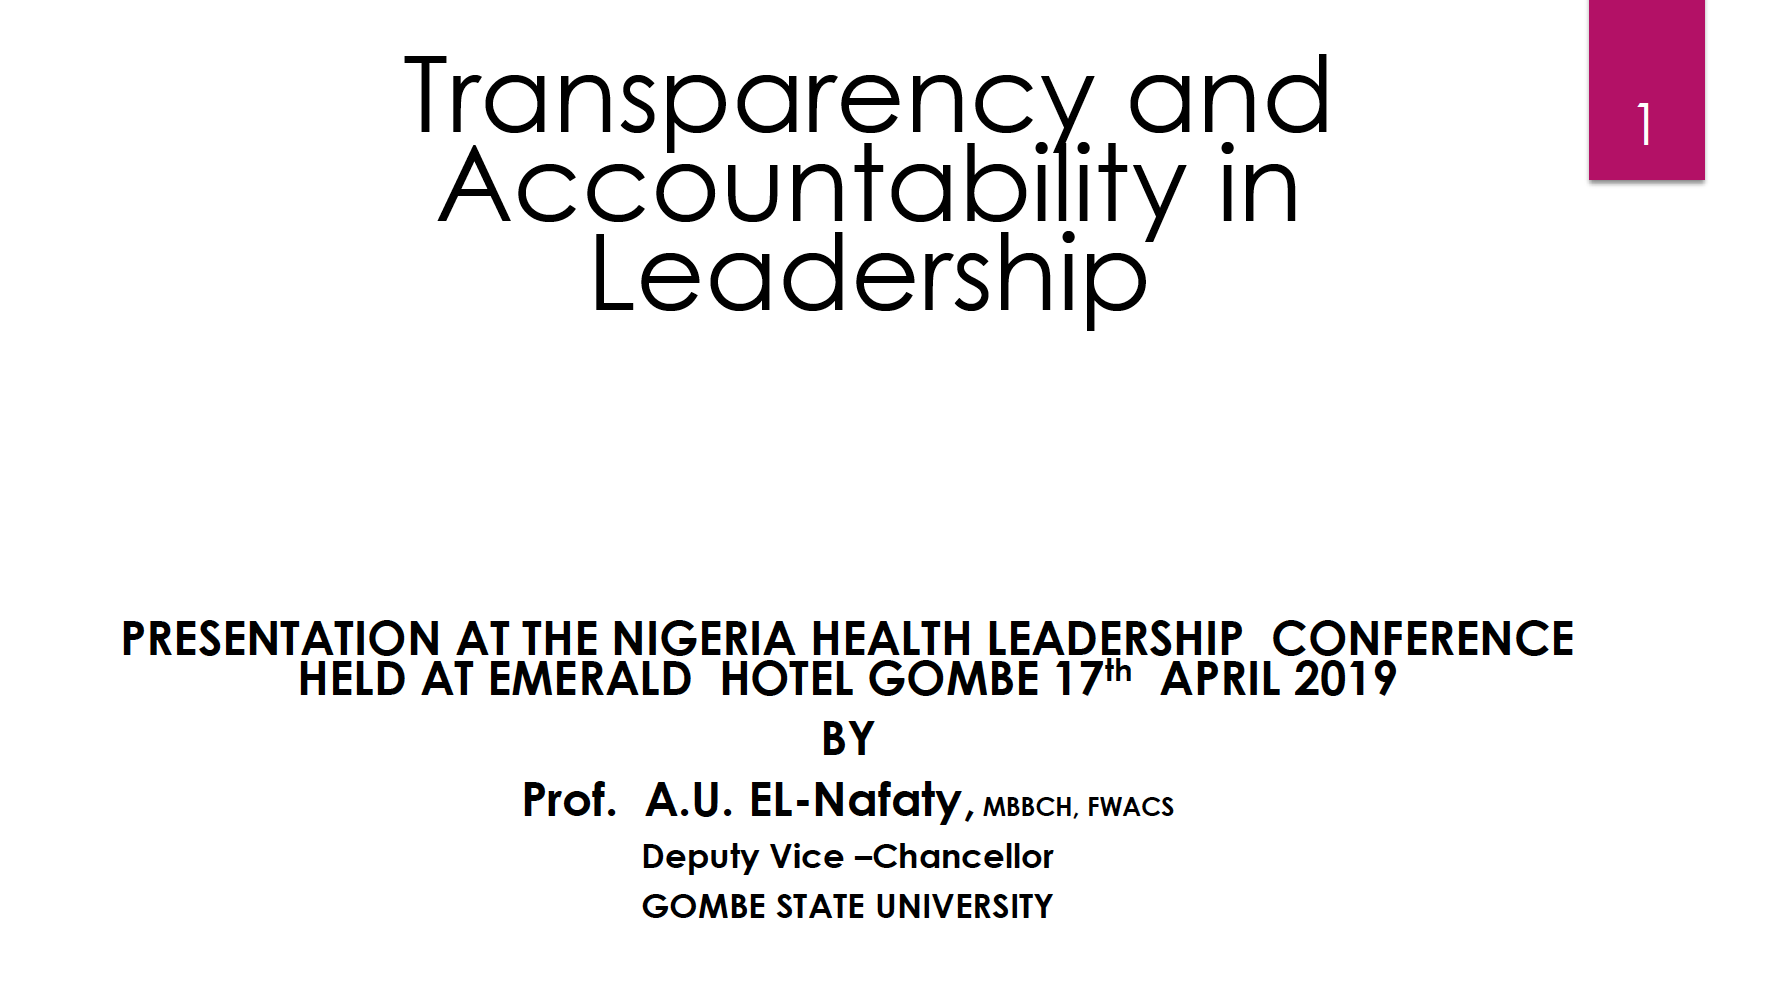 Transparency & Accountability in leadership